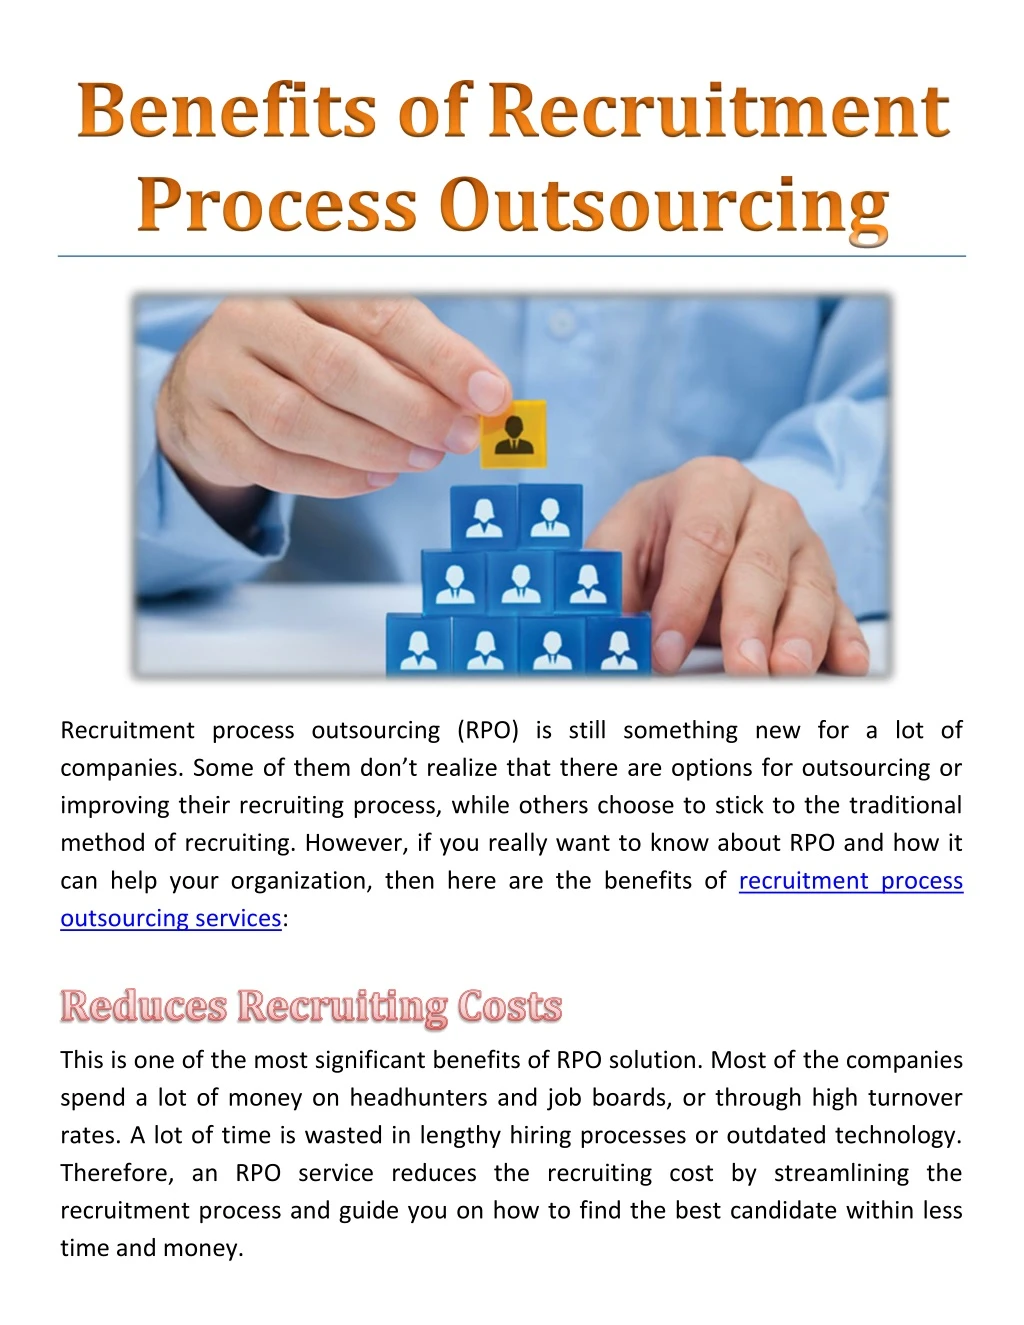 recruitment process outsourcing rpo is still